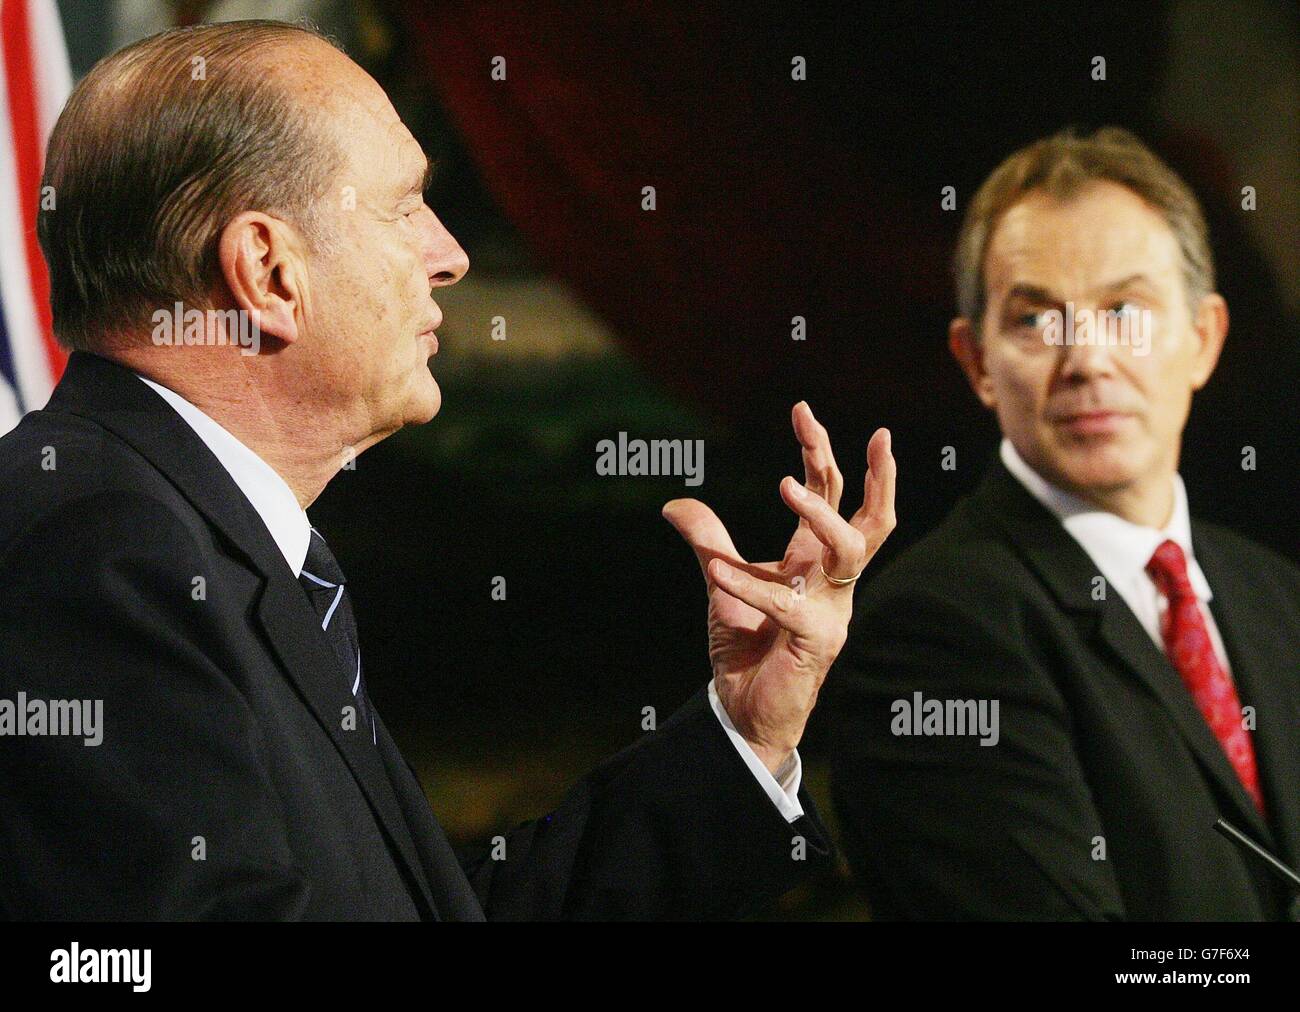 French President Jacques Chirac (left) gestures as British Prime Minister Tony Blair looks on during the 27th UK-France Summit at Lancaster House in London. The summit comes at the end of the celebrations marking the centenary of the Entente Cordiale Treaty, which laid the foundations for a permanent alliance between the two countries. See PA story POLITICS Blair. PA Photo: AFP/Jim Watson/WPA POOL Stock Photo